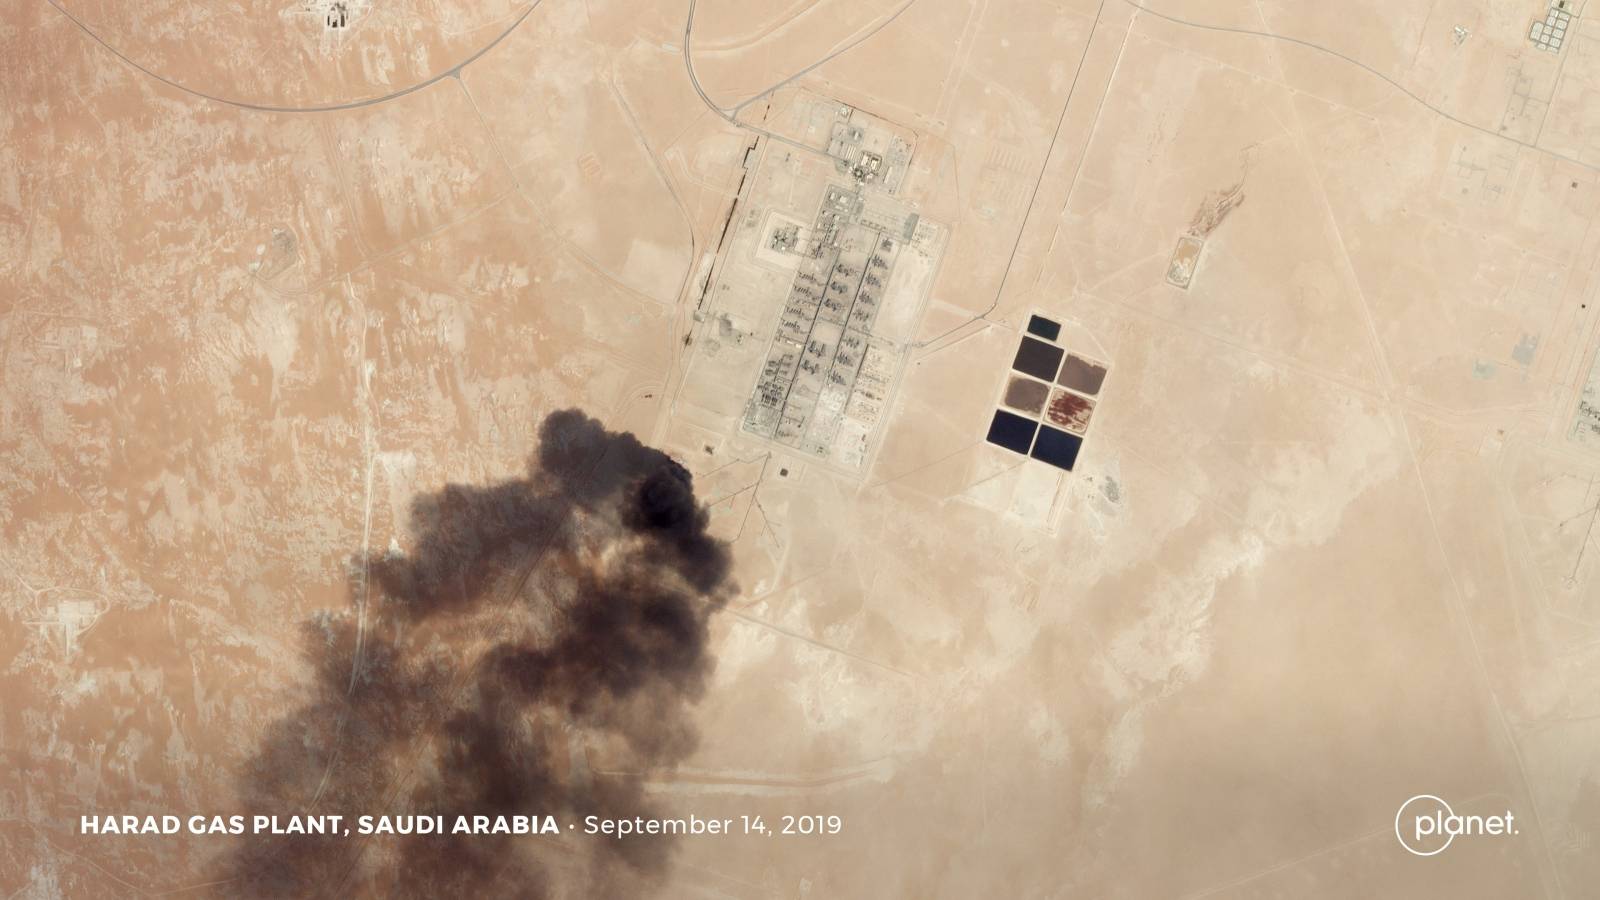 A satellite image shows an apparent drone strike on an Aramco oil facility in Harad